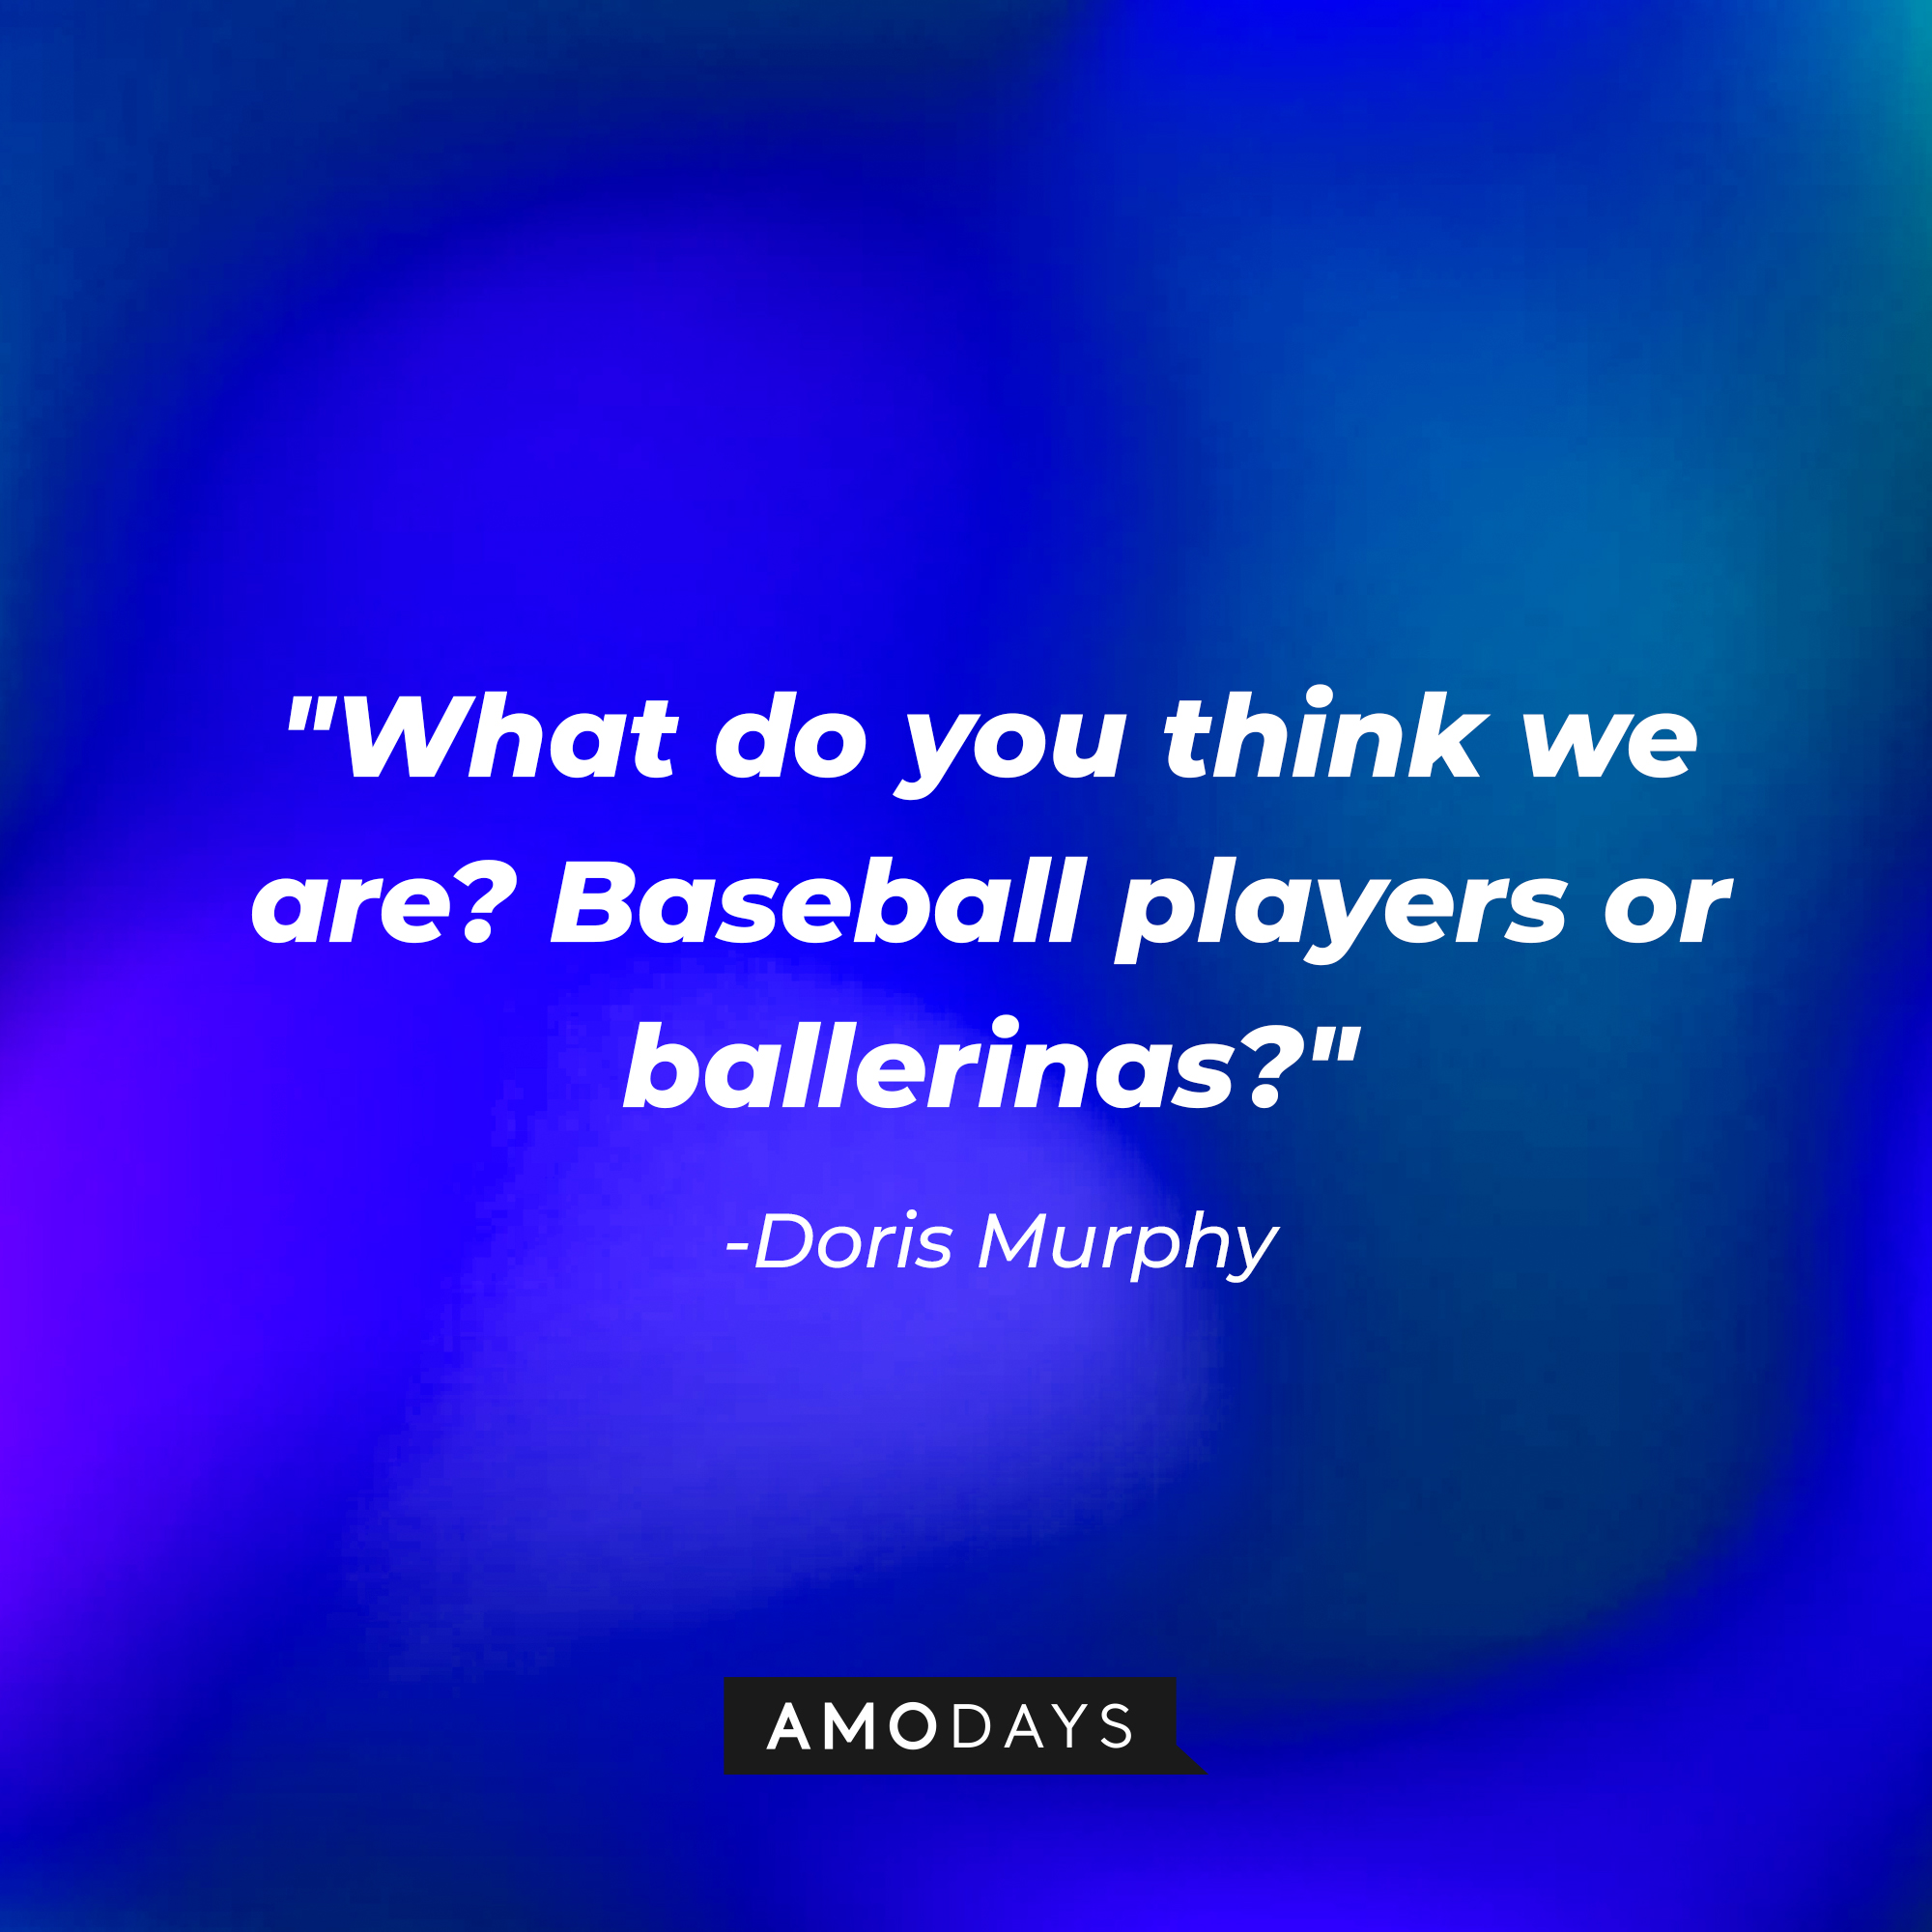 Doris Murphy's quote: "What do you think we are? Baseball players or ballerinas?" | Source: AmoDays